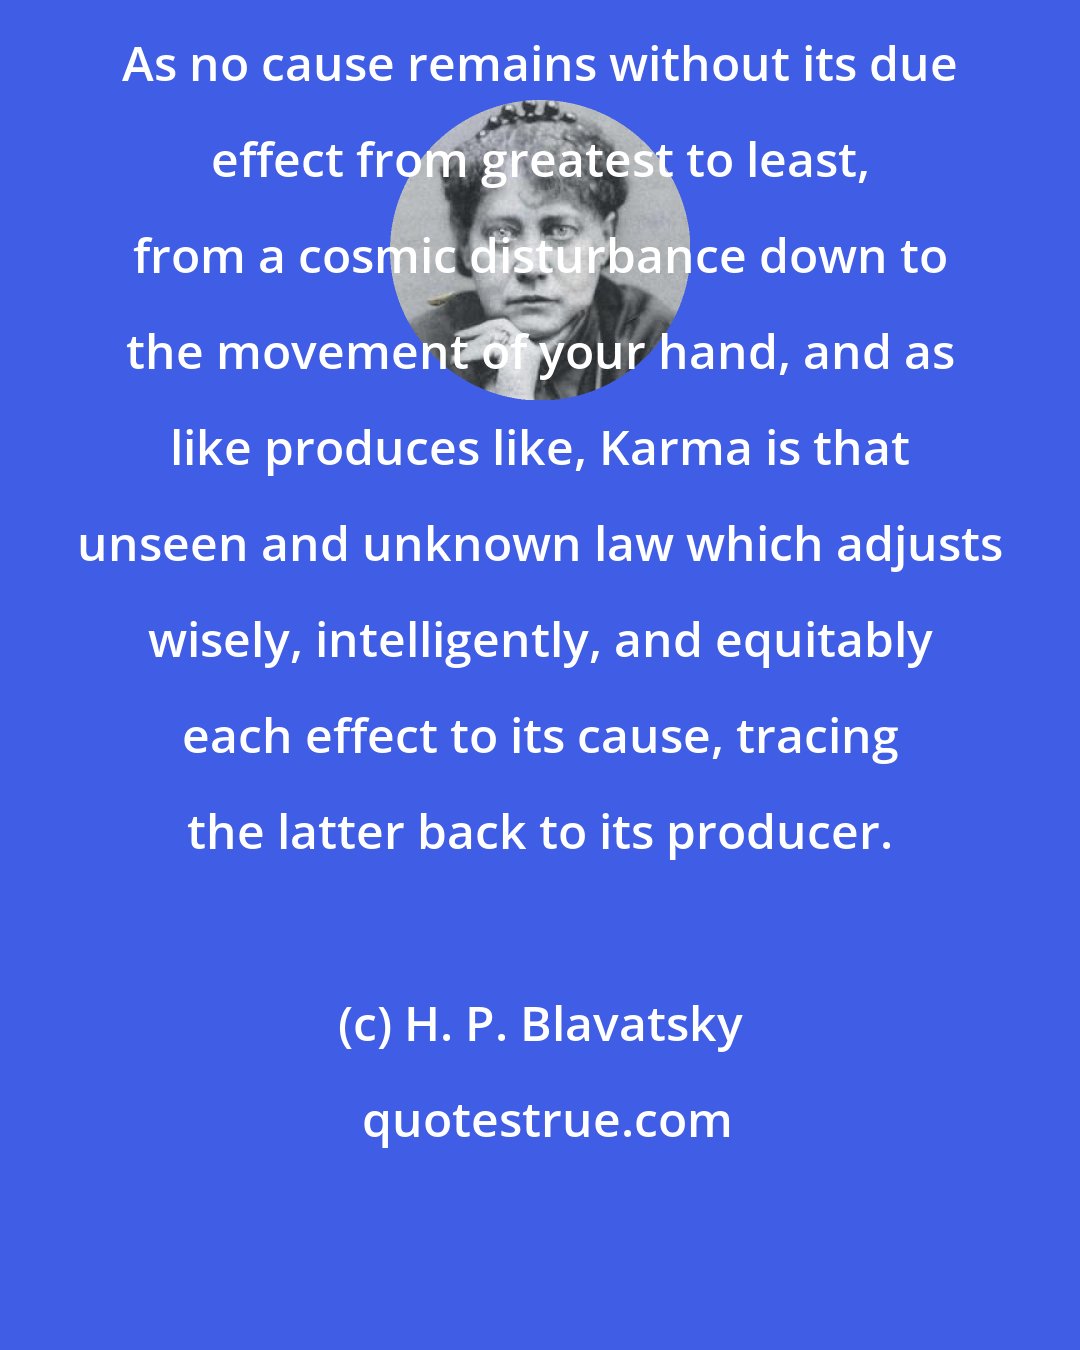 H. P. Blavatsky: As no cause remains without its due effect from greatest to least, from a cosmic disturbance down to the movement of your hand, and as like produces like, Karma is that unseen and unknown law which adjusts wisely, intelligently, and equitably each effect to its cause, tracing the latter back to its producer.